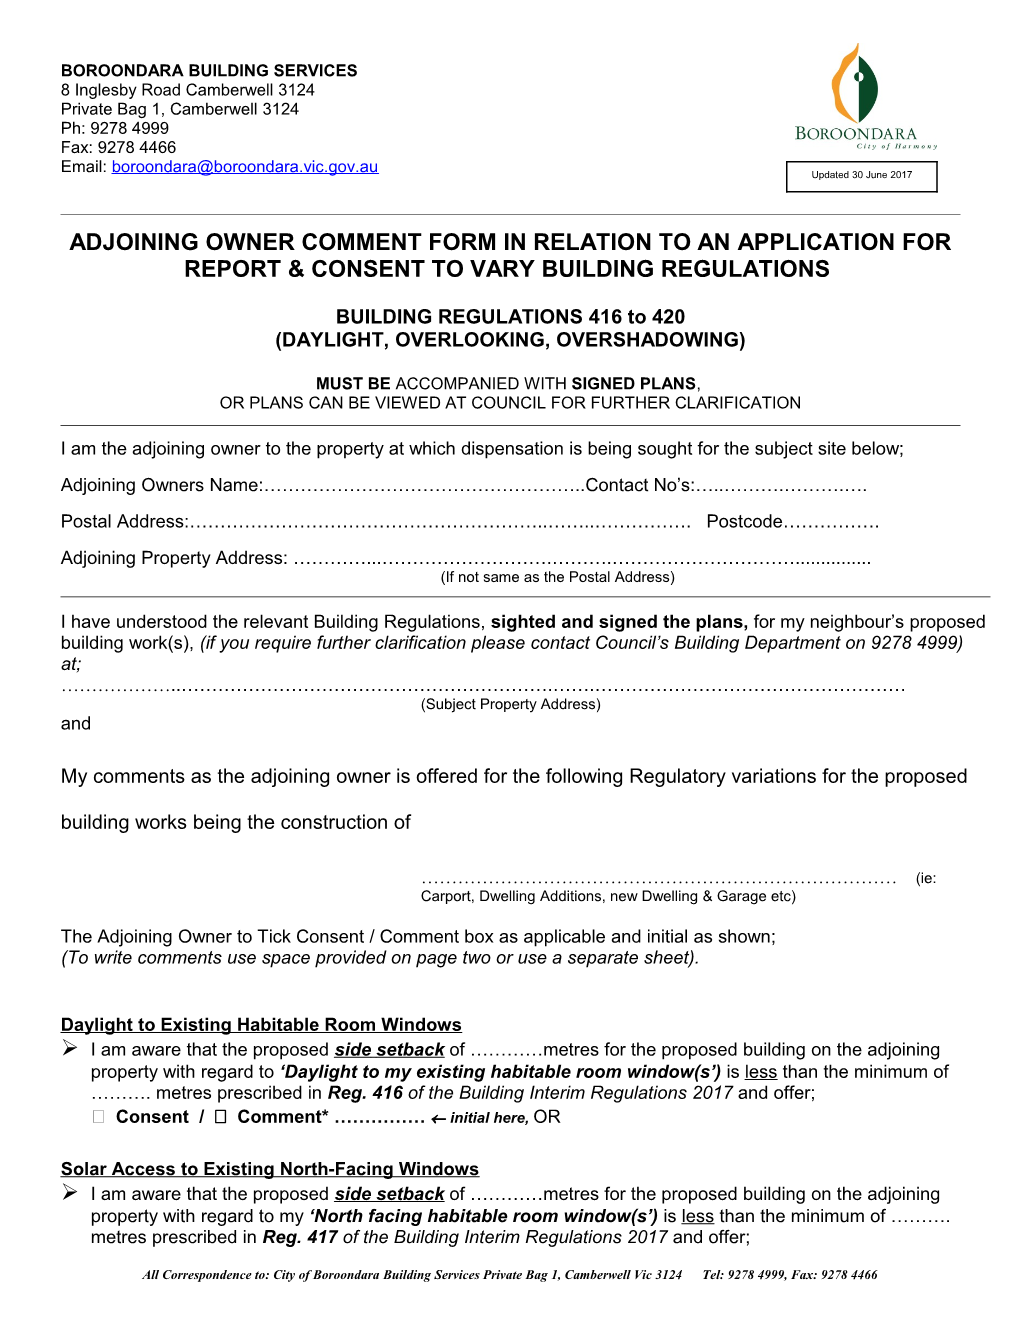 Report and Consent Adjoining Owner Comment Form - Regs 416-420